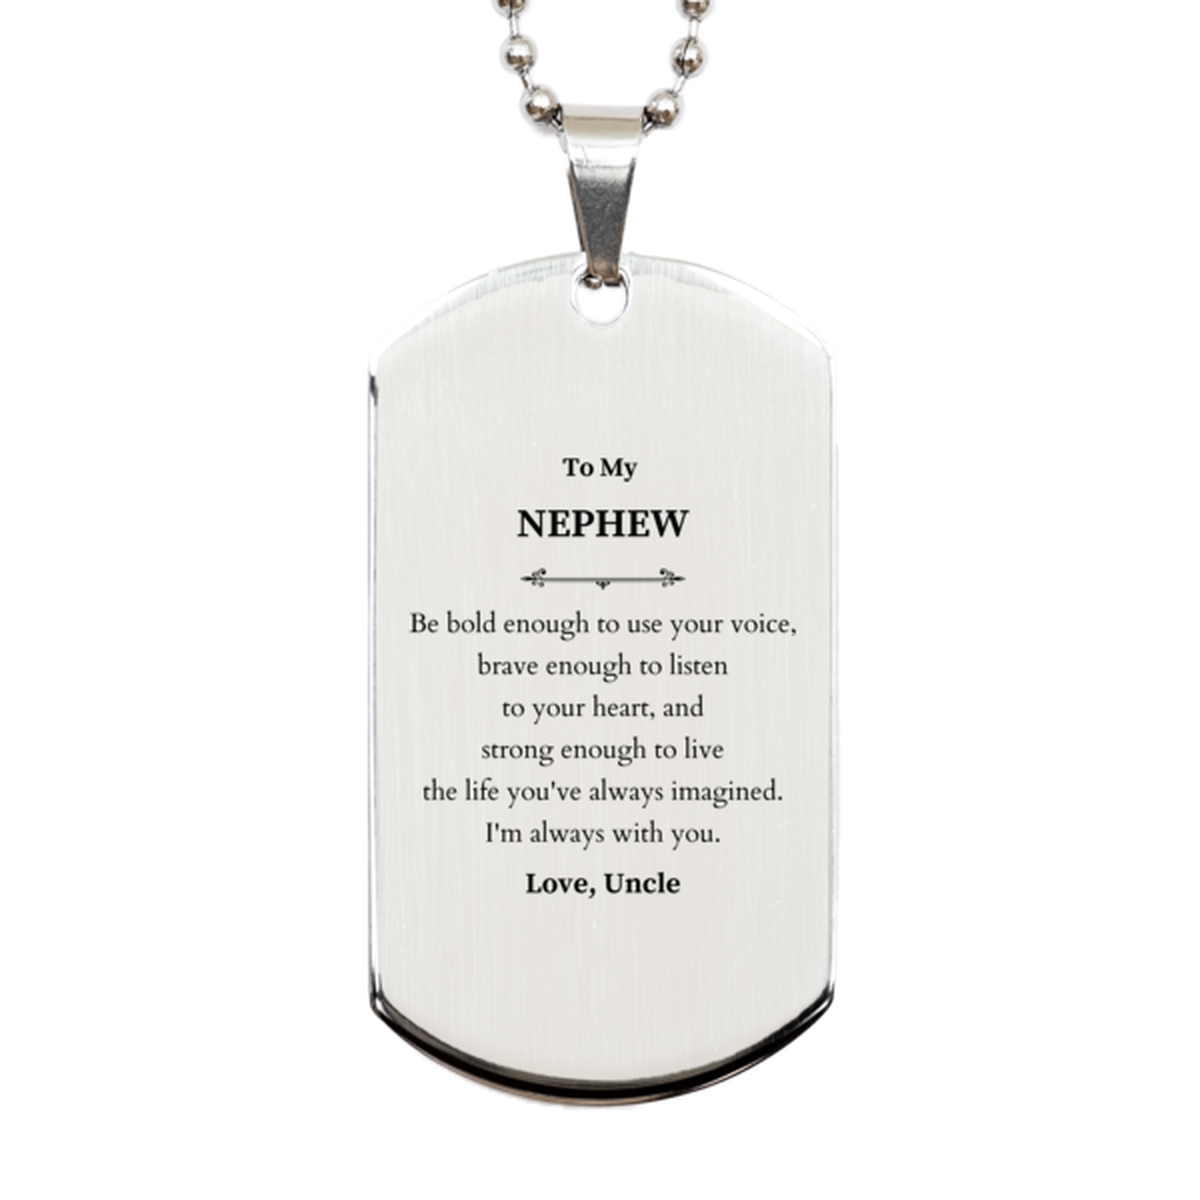 Keepsake Nephew Silver Dog Tag Gift Idea Graduation Christmas Birthday Nephew from Uncle, Nephew Be bold enough to use your voice, brave enough to listen to your heart. Love, Uncle